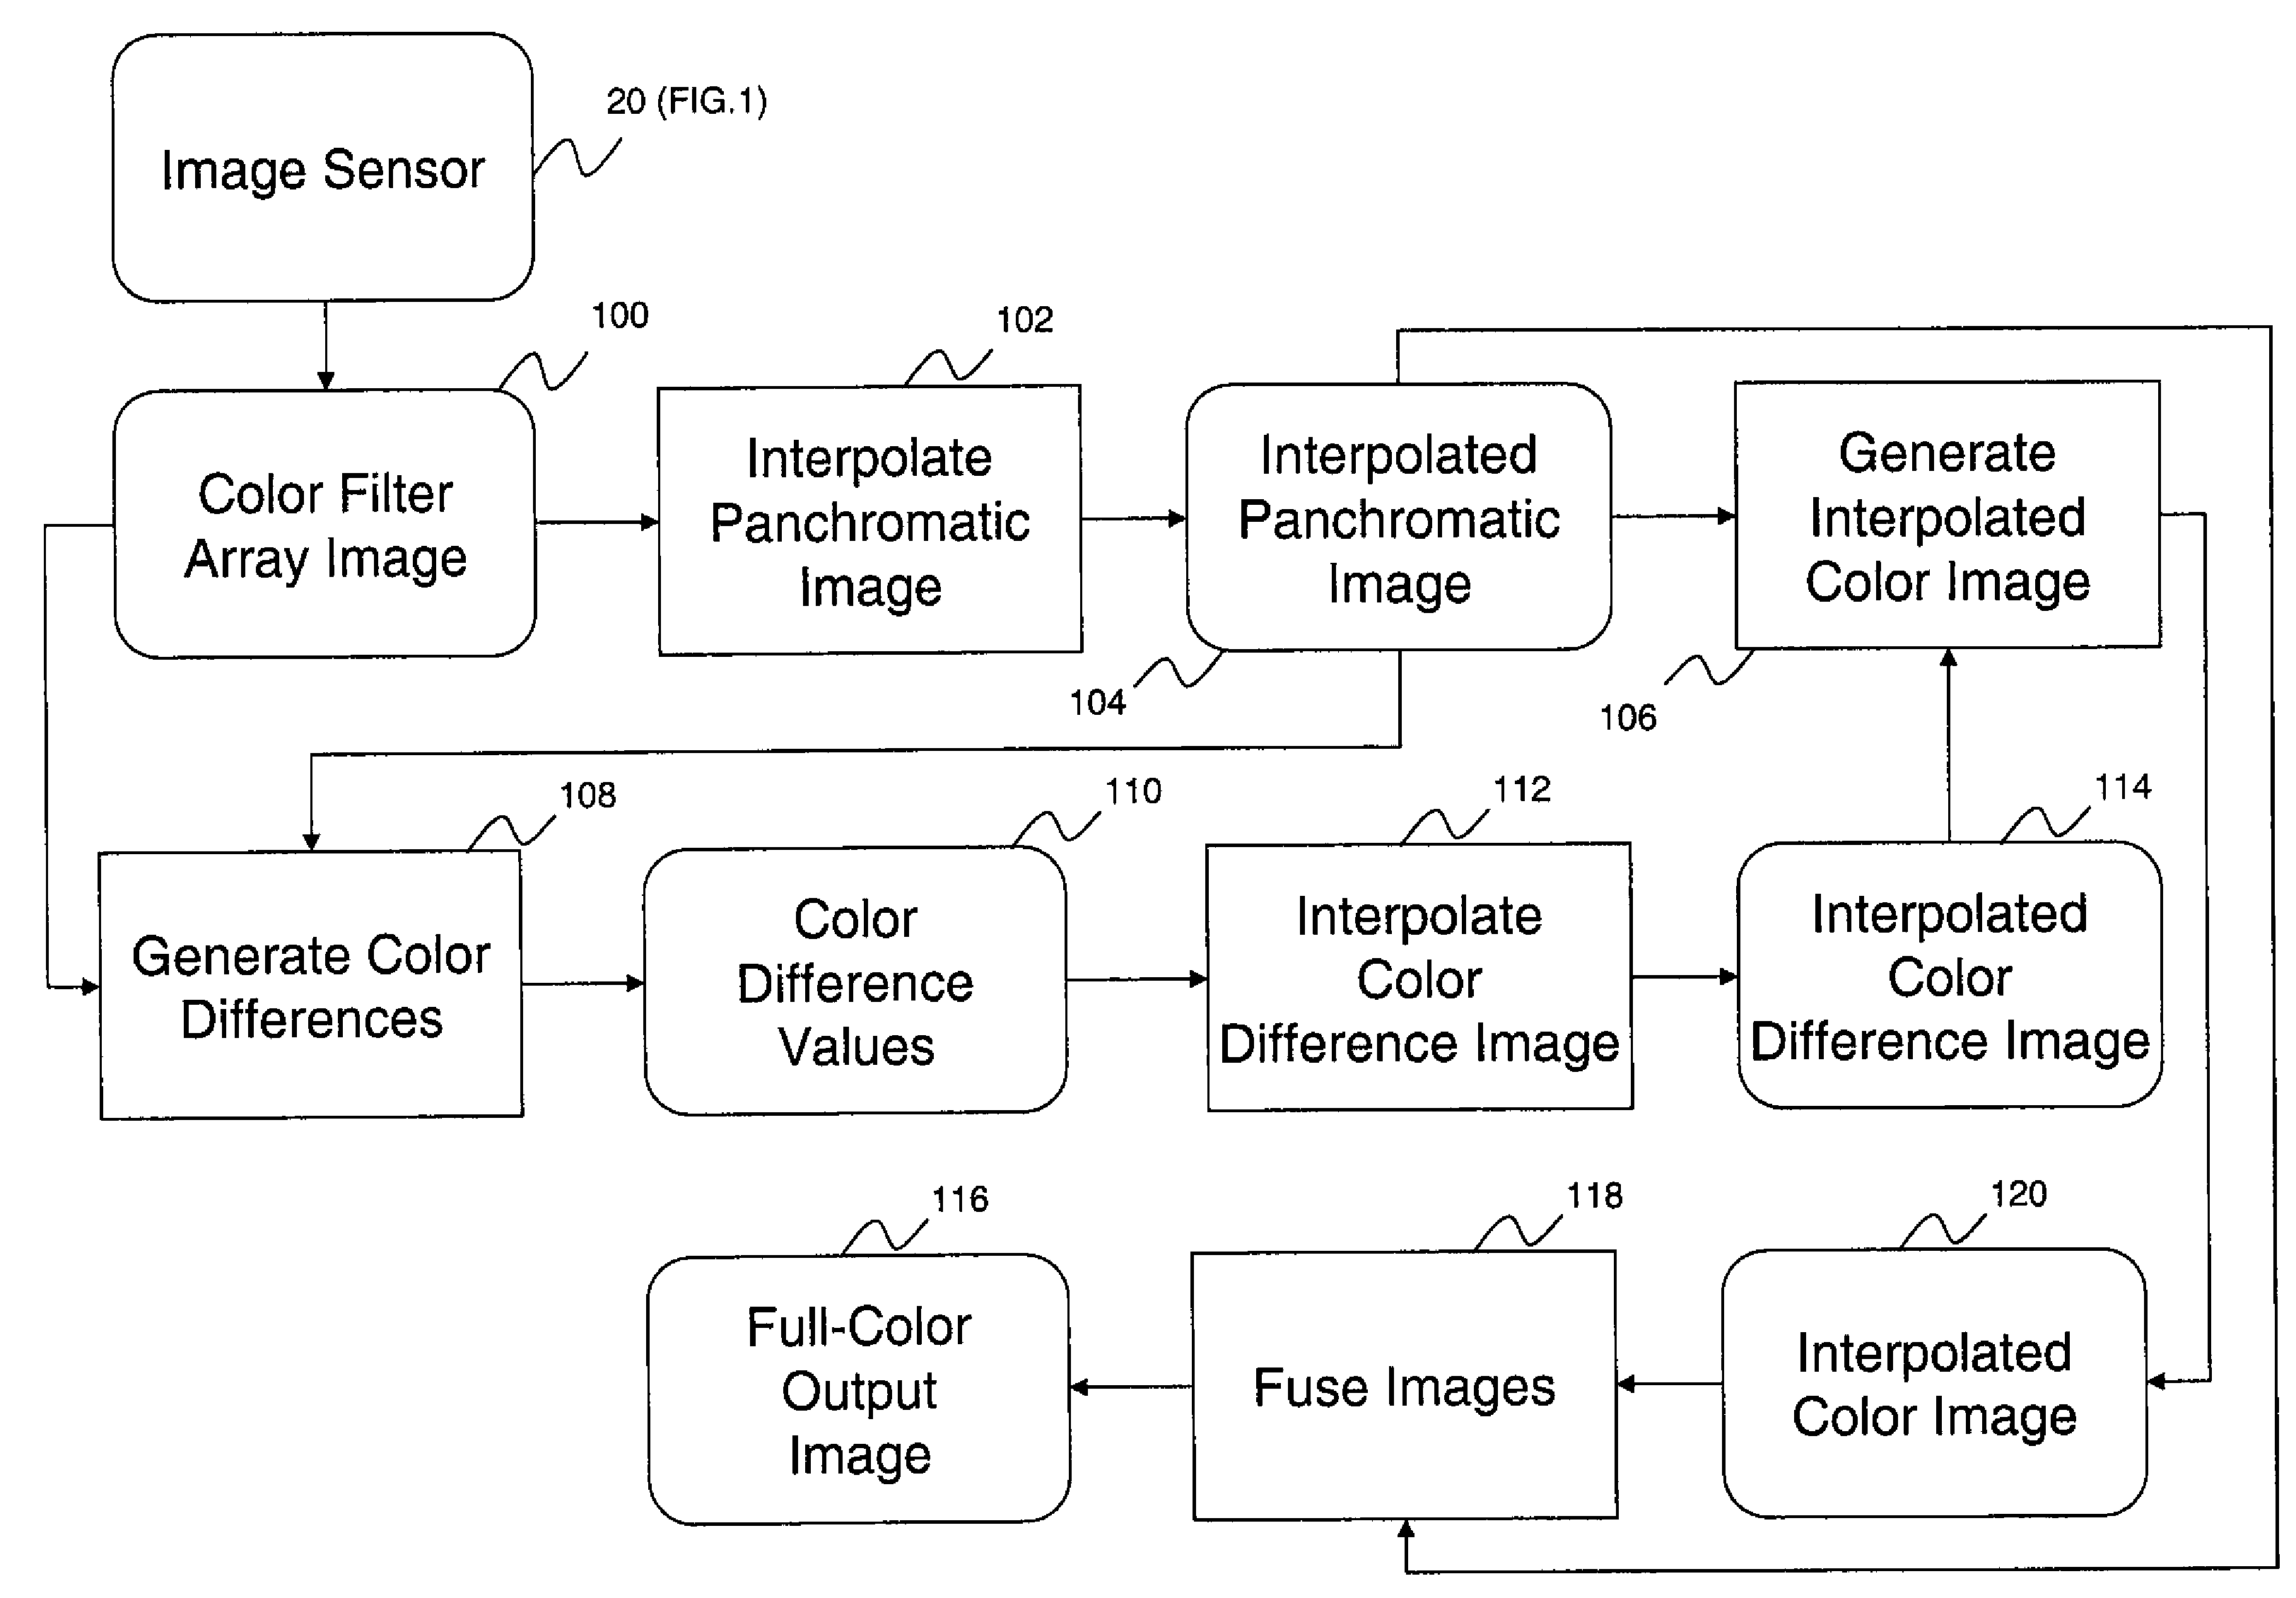 Interpolation for four-channel color filter array